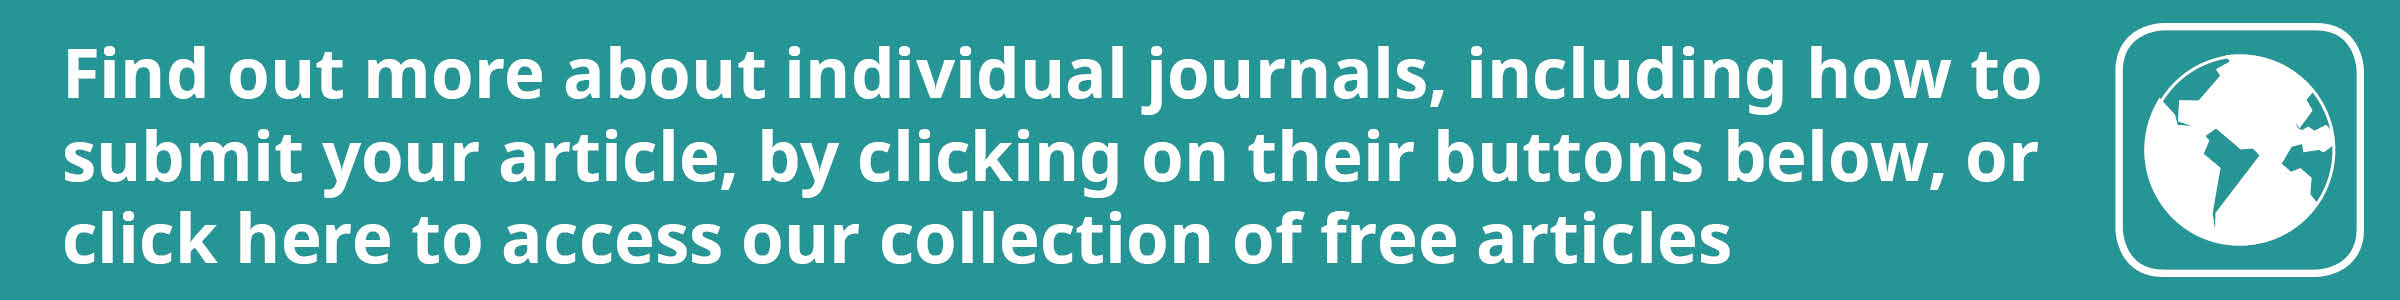 Journals article collection